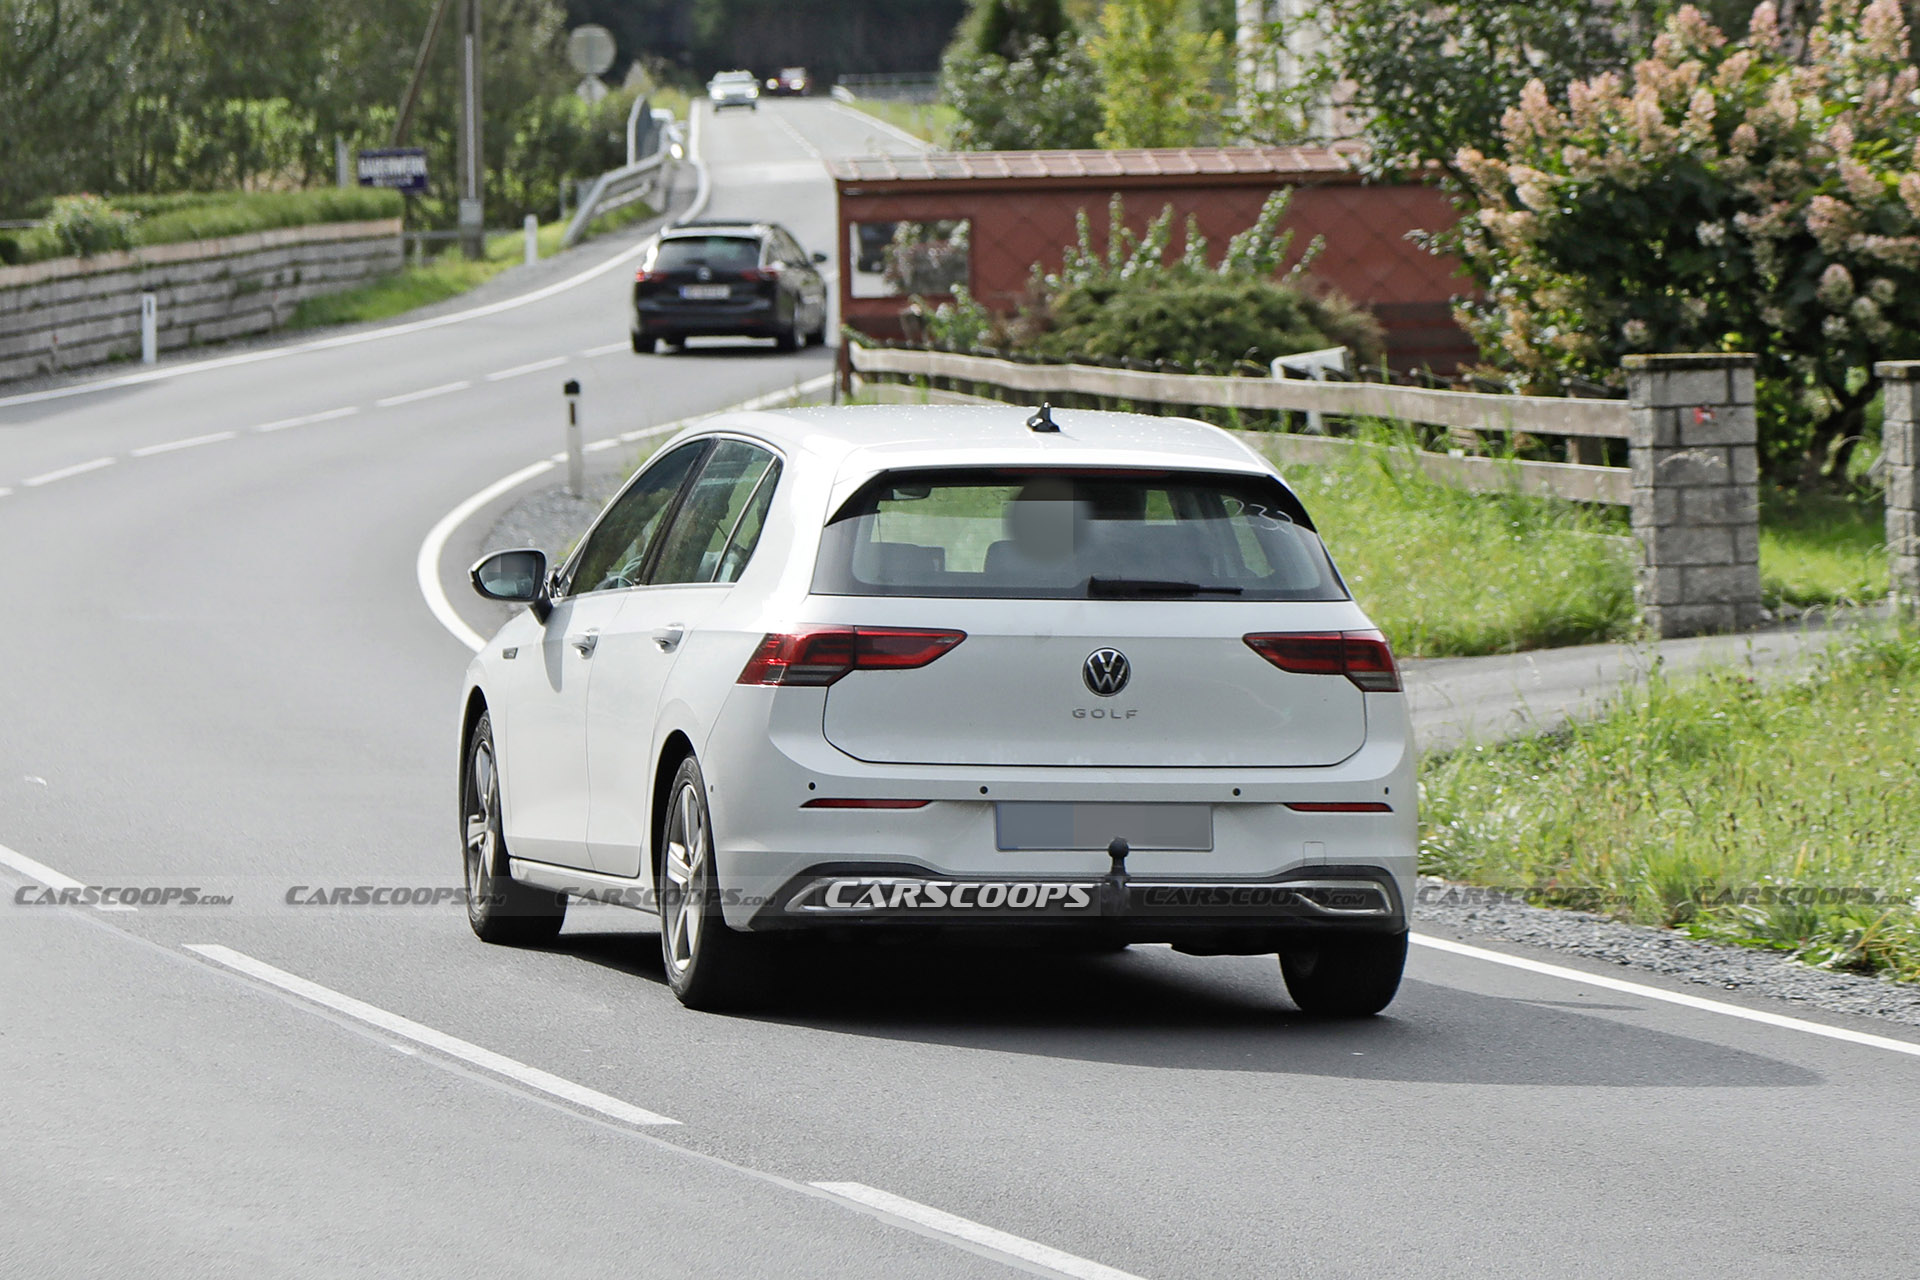 LEAKED: Volkswagen Golf Is Getting A Facelift